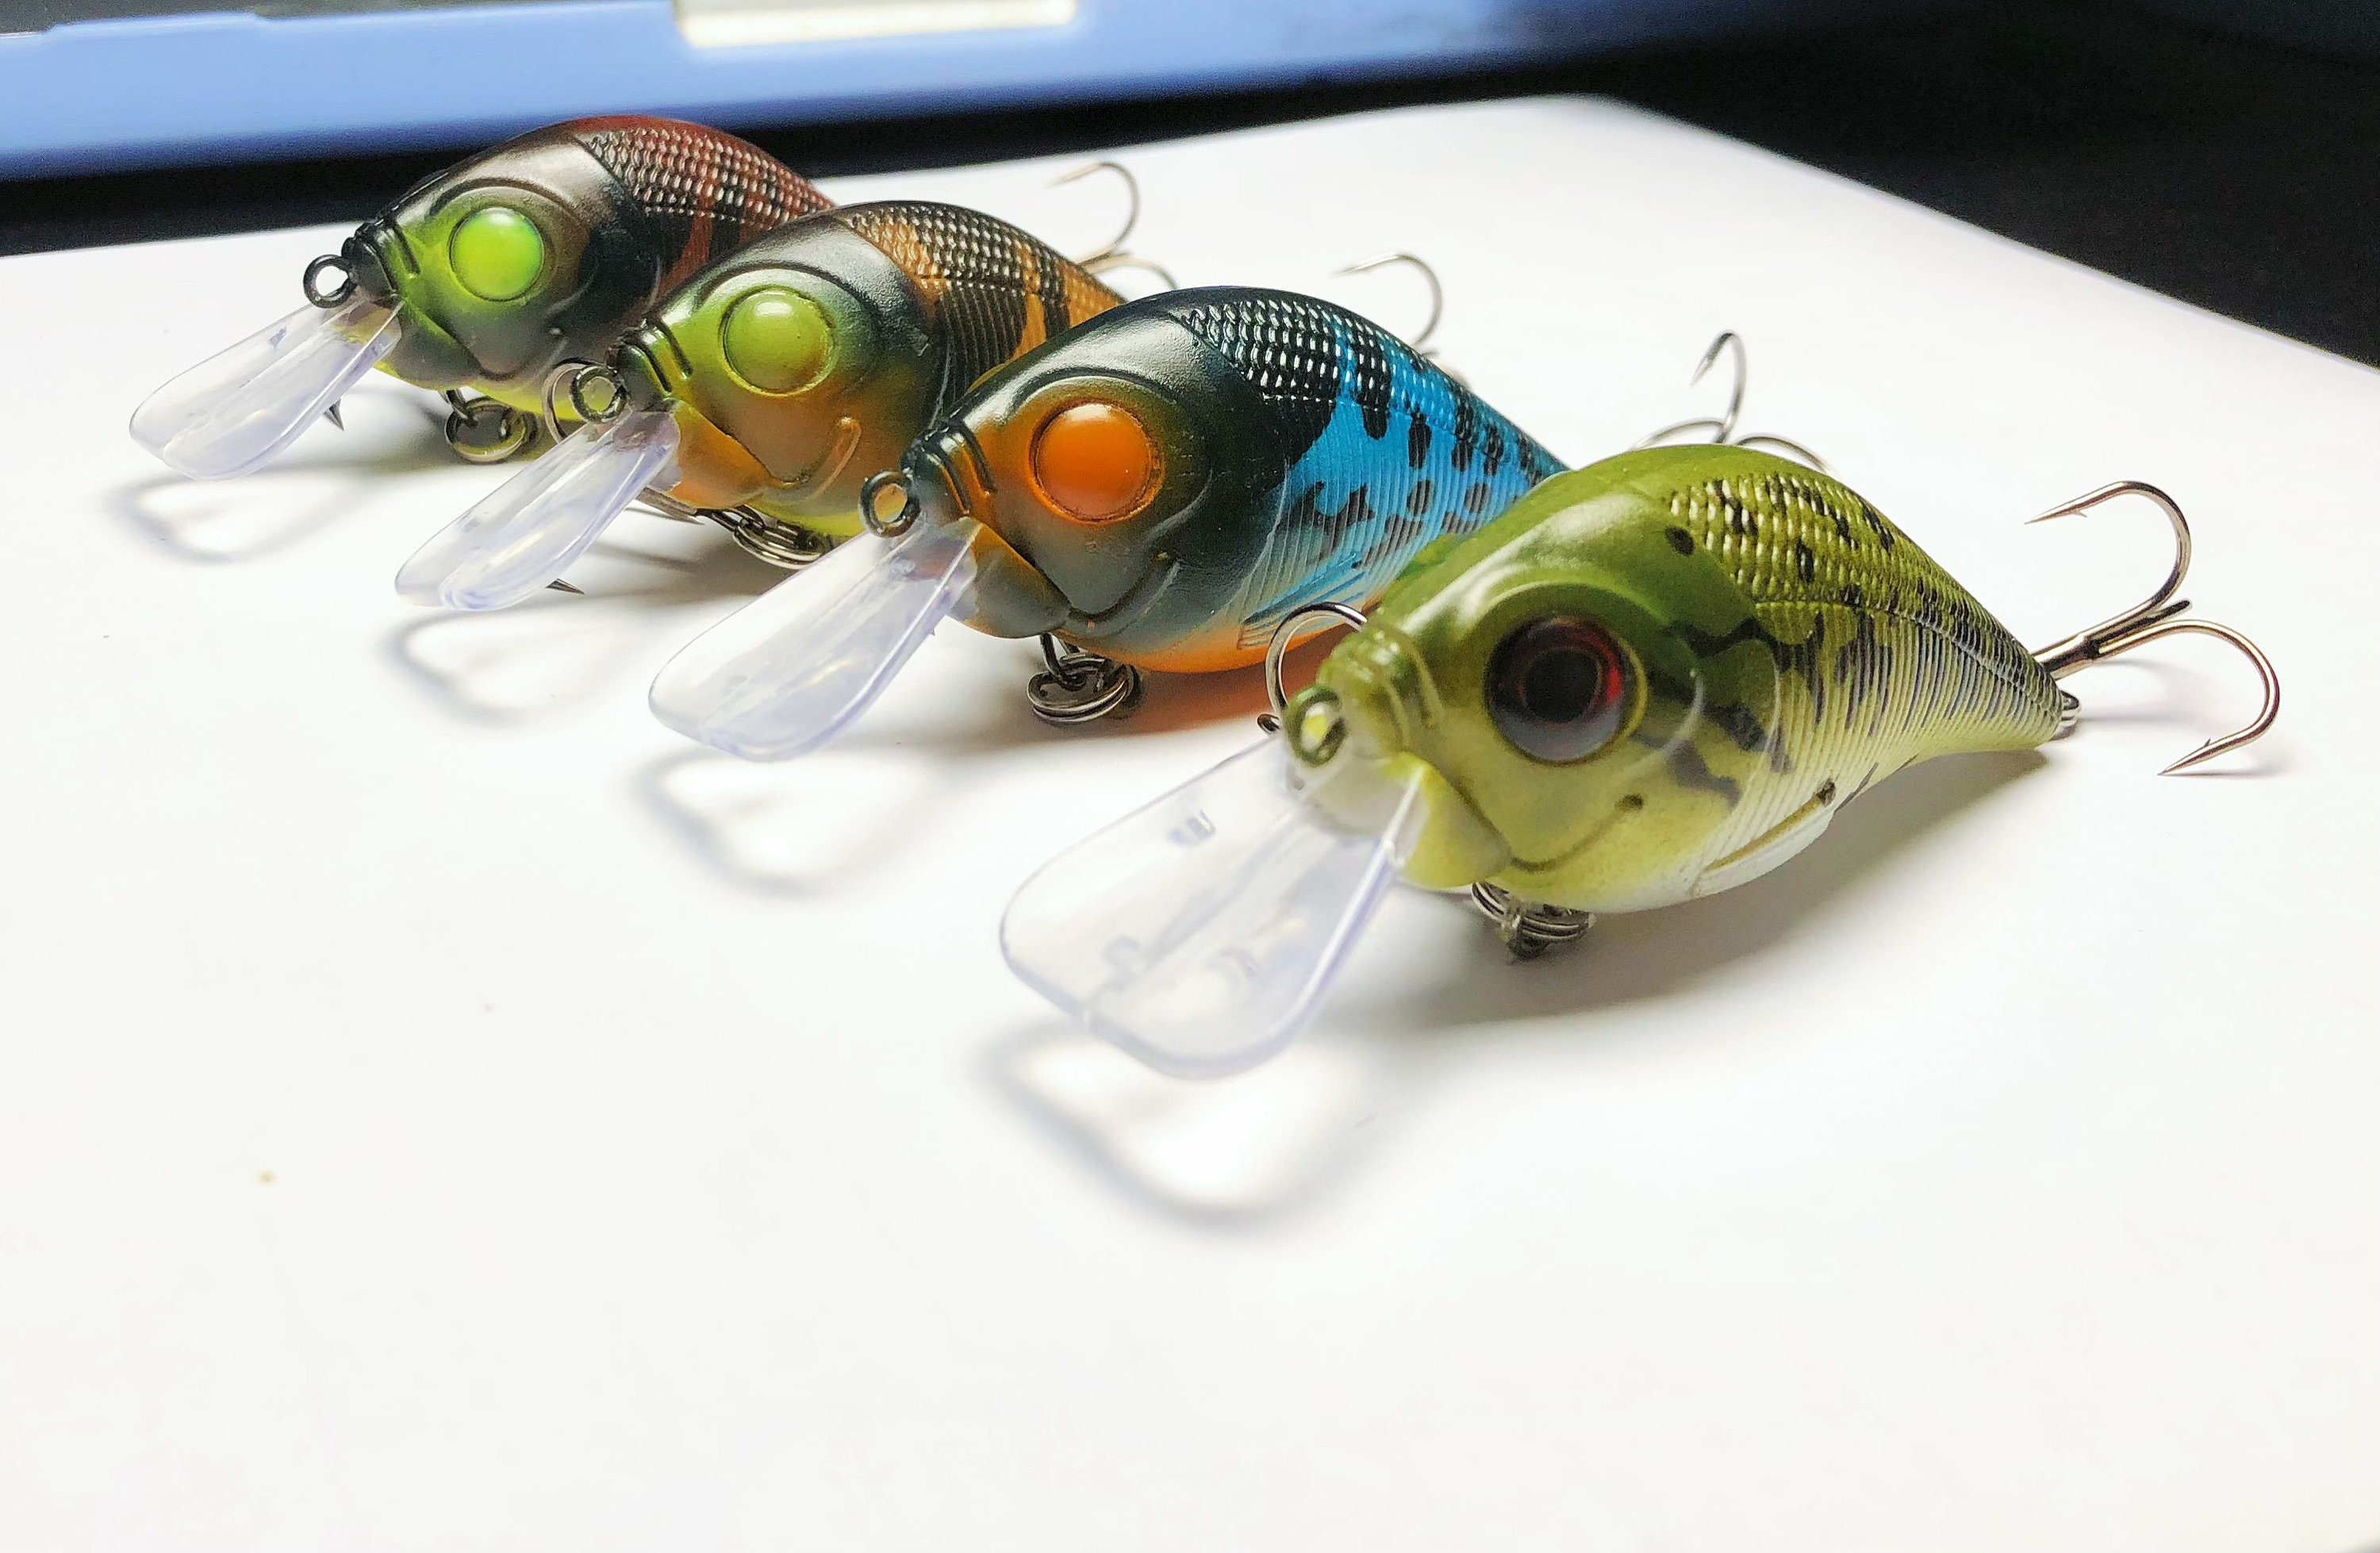 Custom Painted Lures 2.5 Crankbait Crawfish Colored, Fishing Lures, Bass  Lures. Lures. 